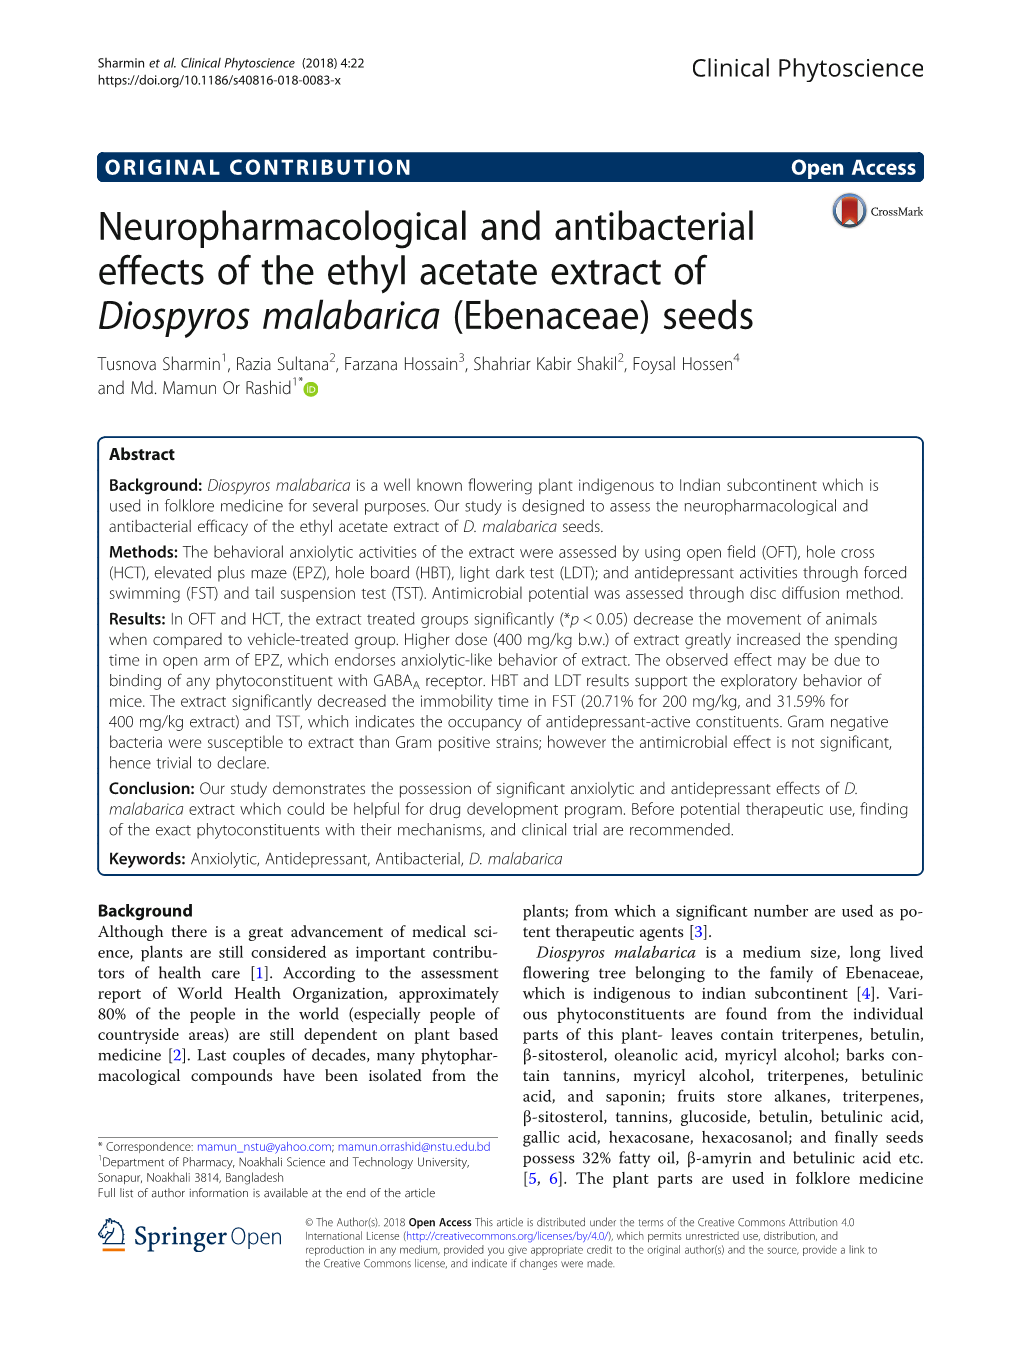 Neuropharmacological and Antibacterial